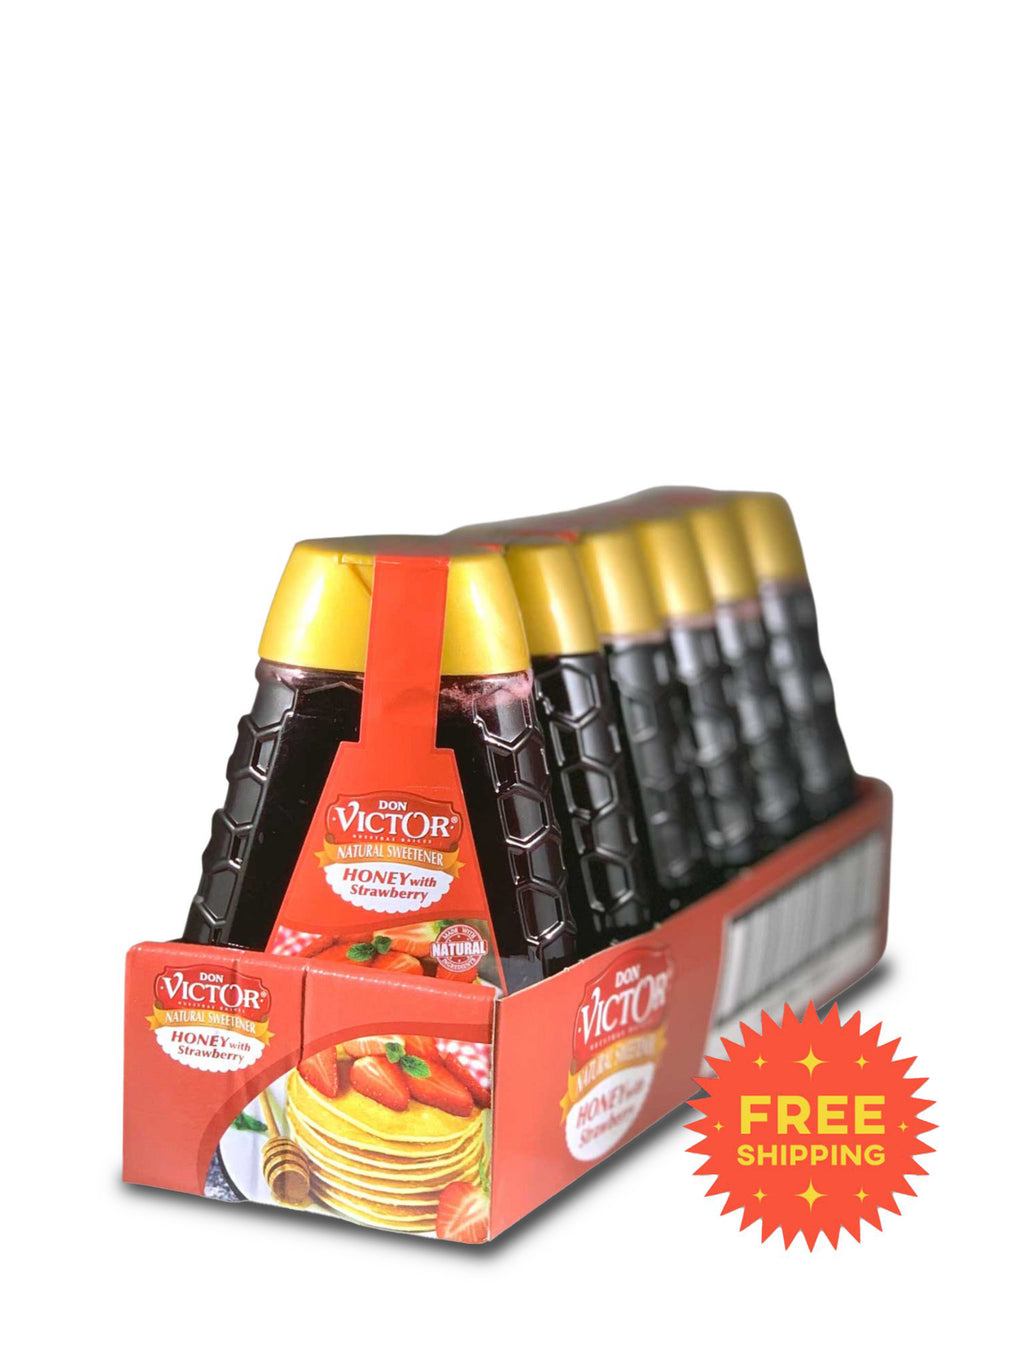 Honey with Strawberry 6-Pack (FREE SHIPPING W/ CODE)